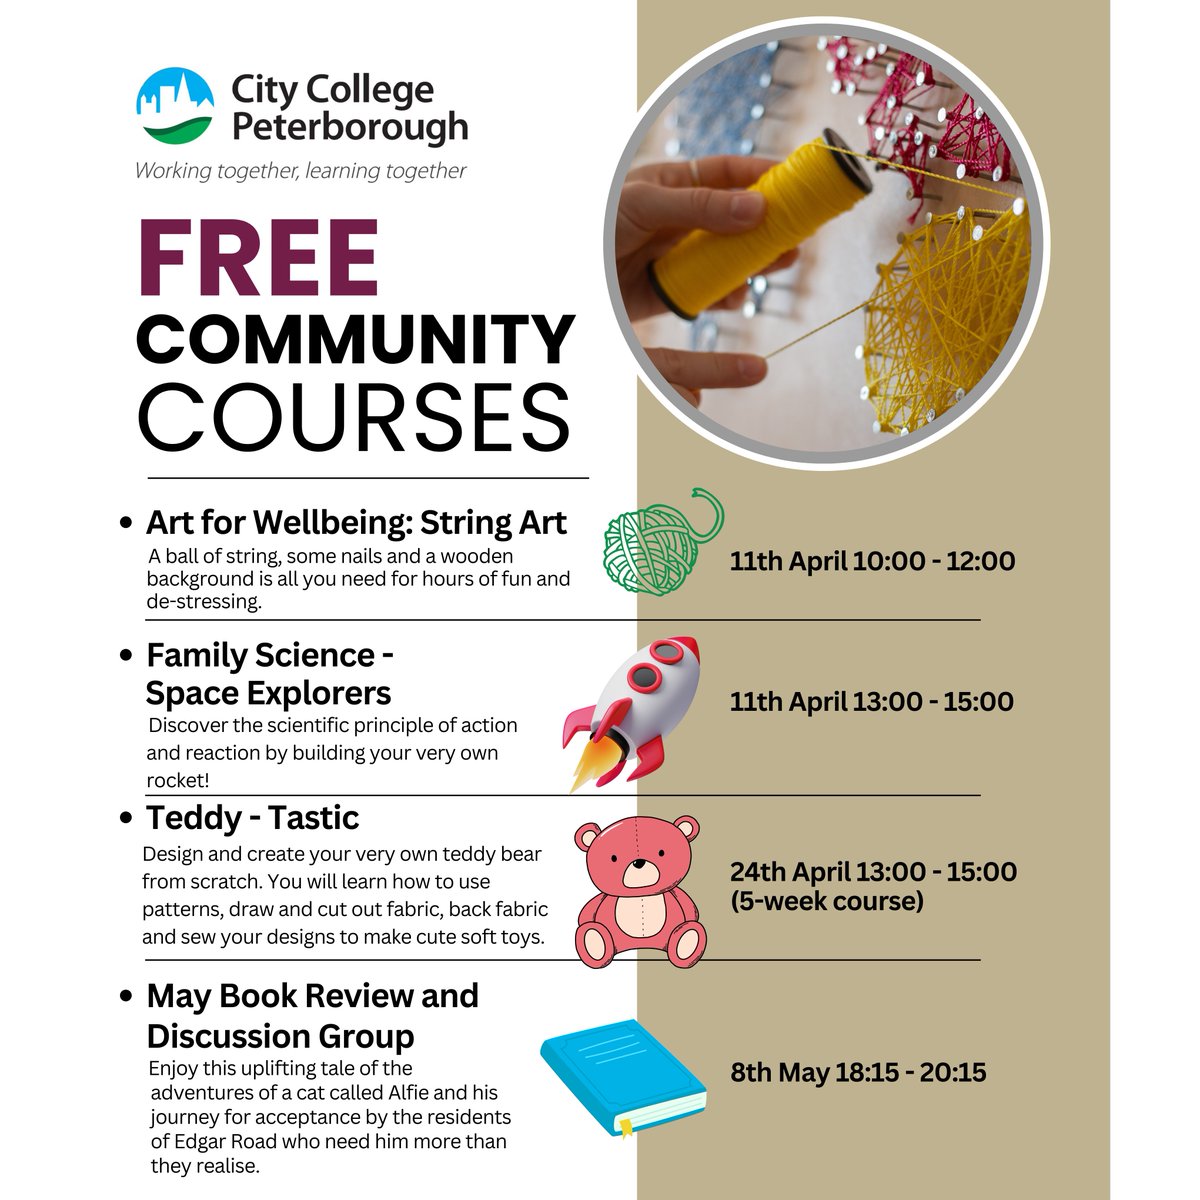 🧵 🧸Take a look at our upcoming FREE courses! From making your own teddy bear, to a string art workshop, to making your own cushion, we've got a range of FREE creative workshops for you and the family. Enrol today: ow.ly/i2Z550R6oQU #freecourses #familycourses #daysout